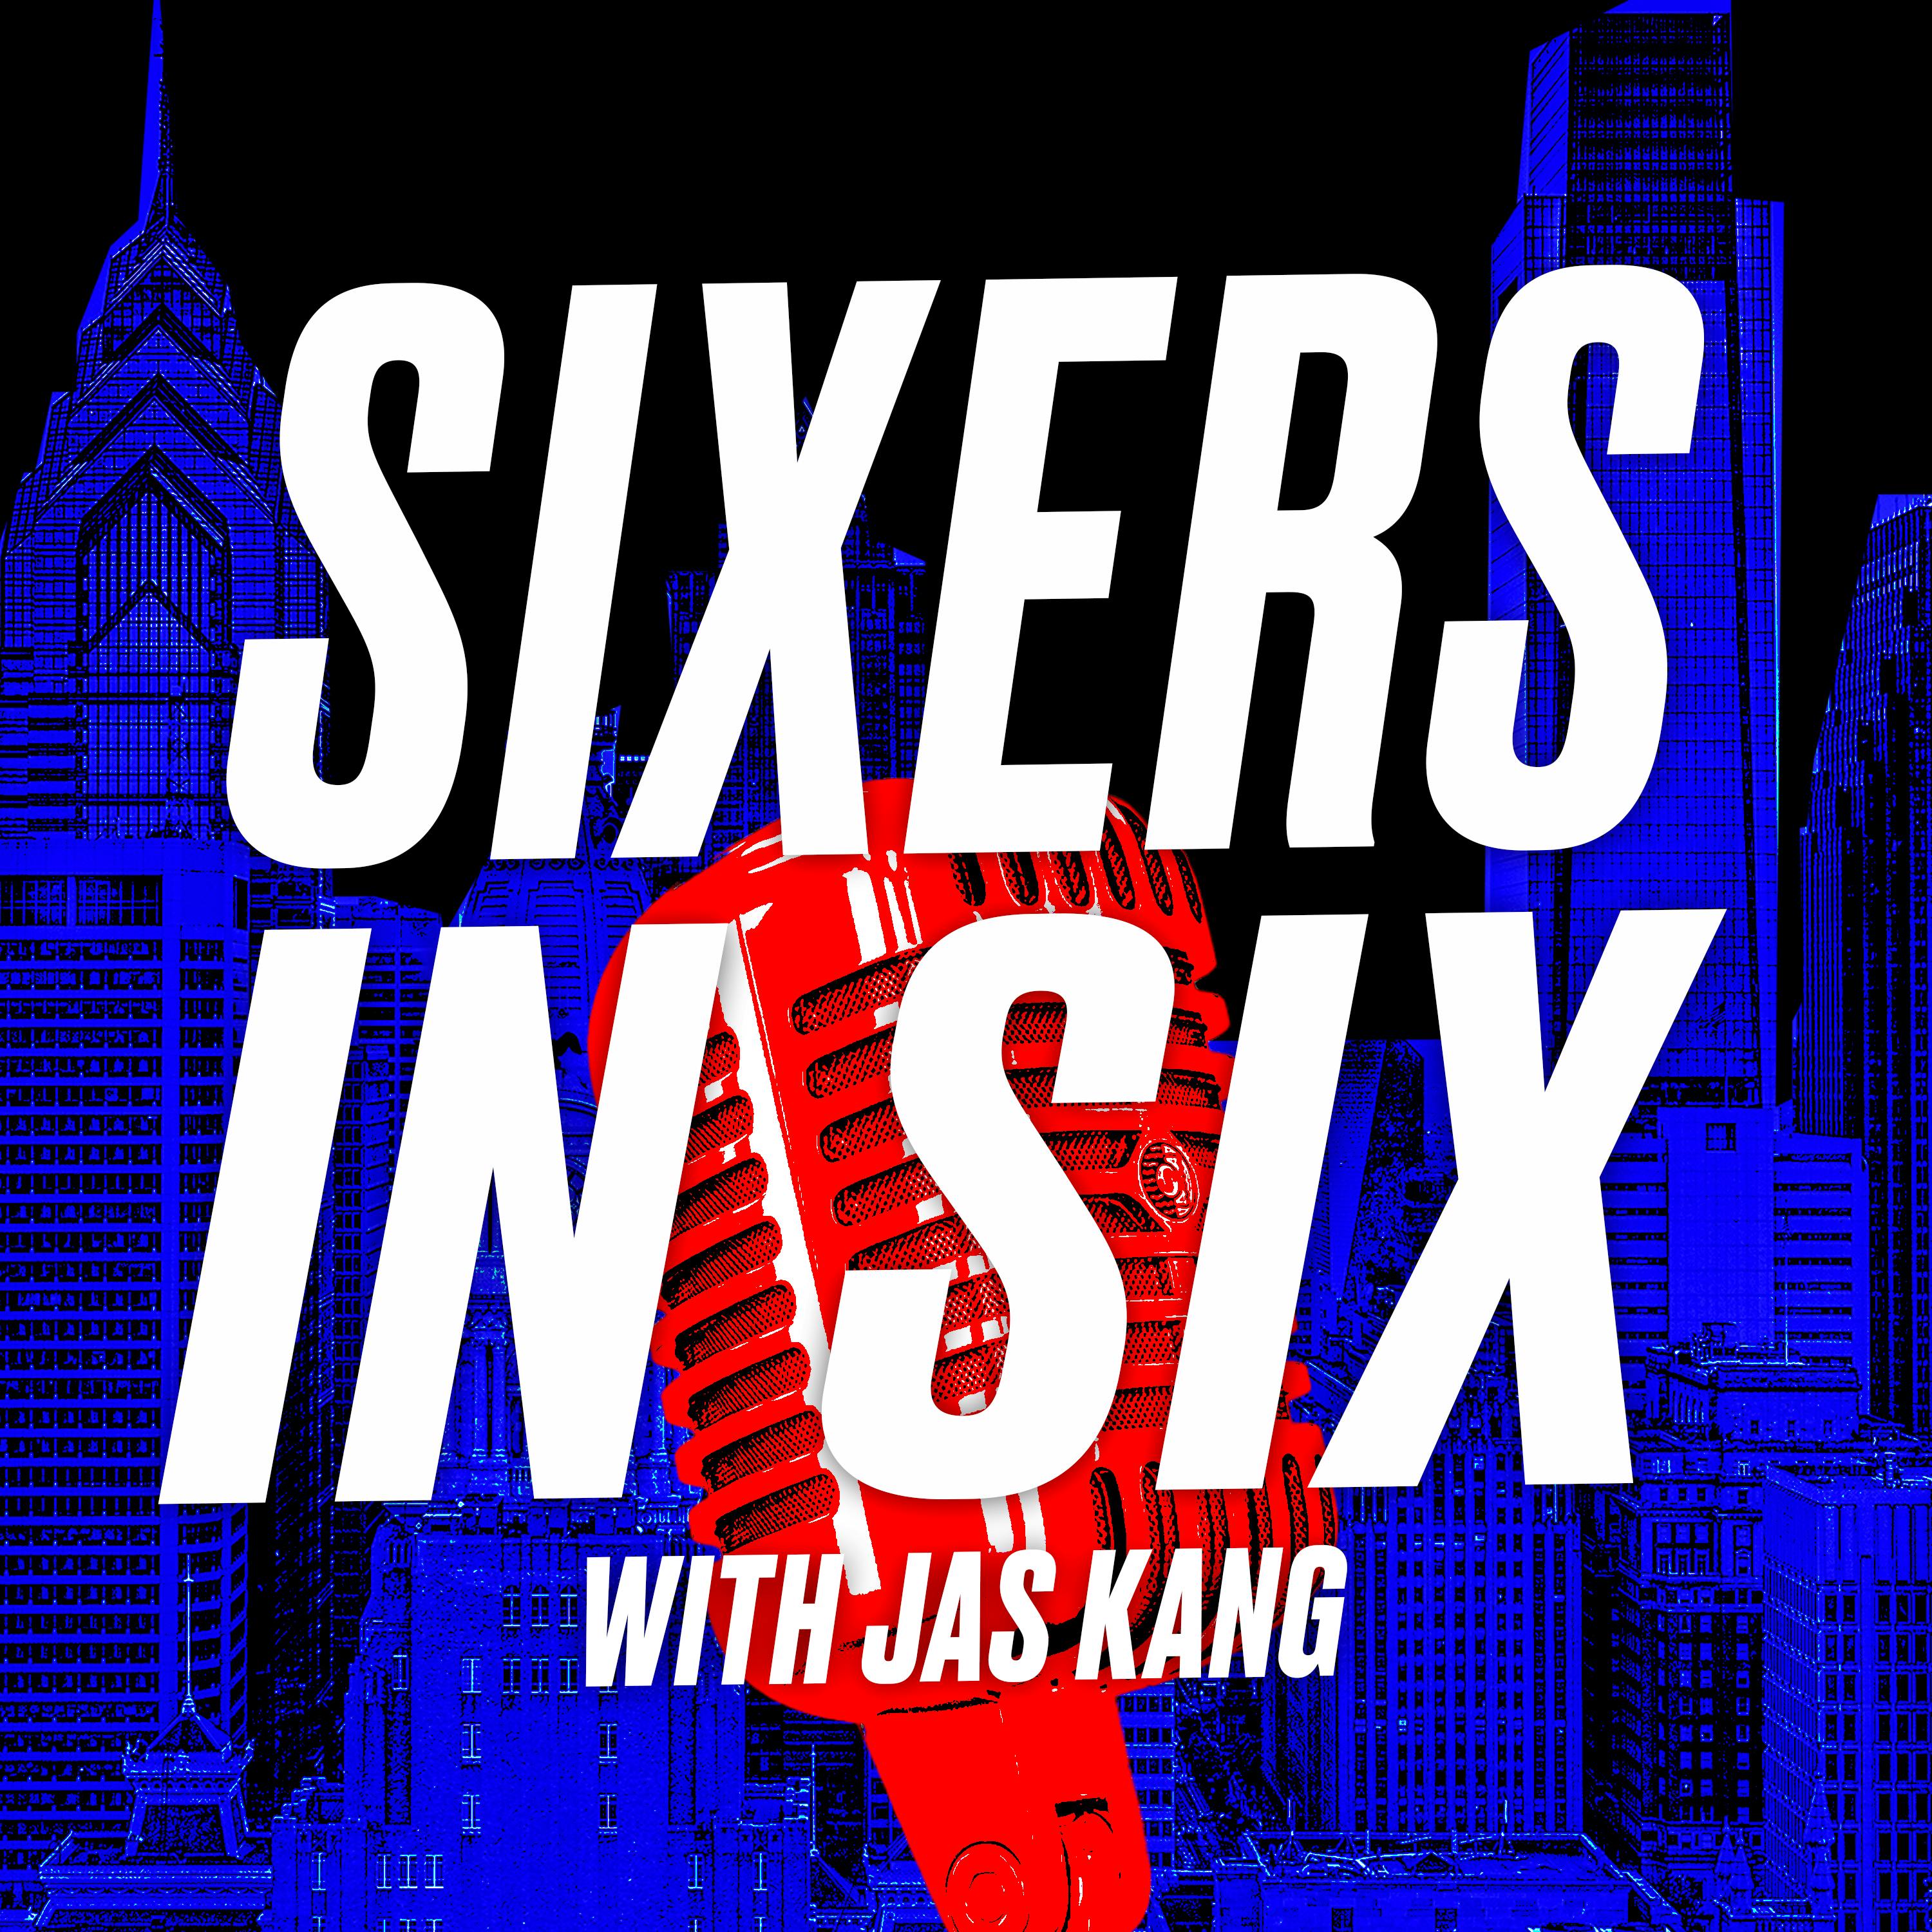 Previewing Friday's Sixers vs. Lakers matchup: Sixers in Six with Anthony Irwin of SB Nation's Silver Screen and Roll